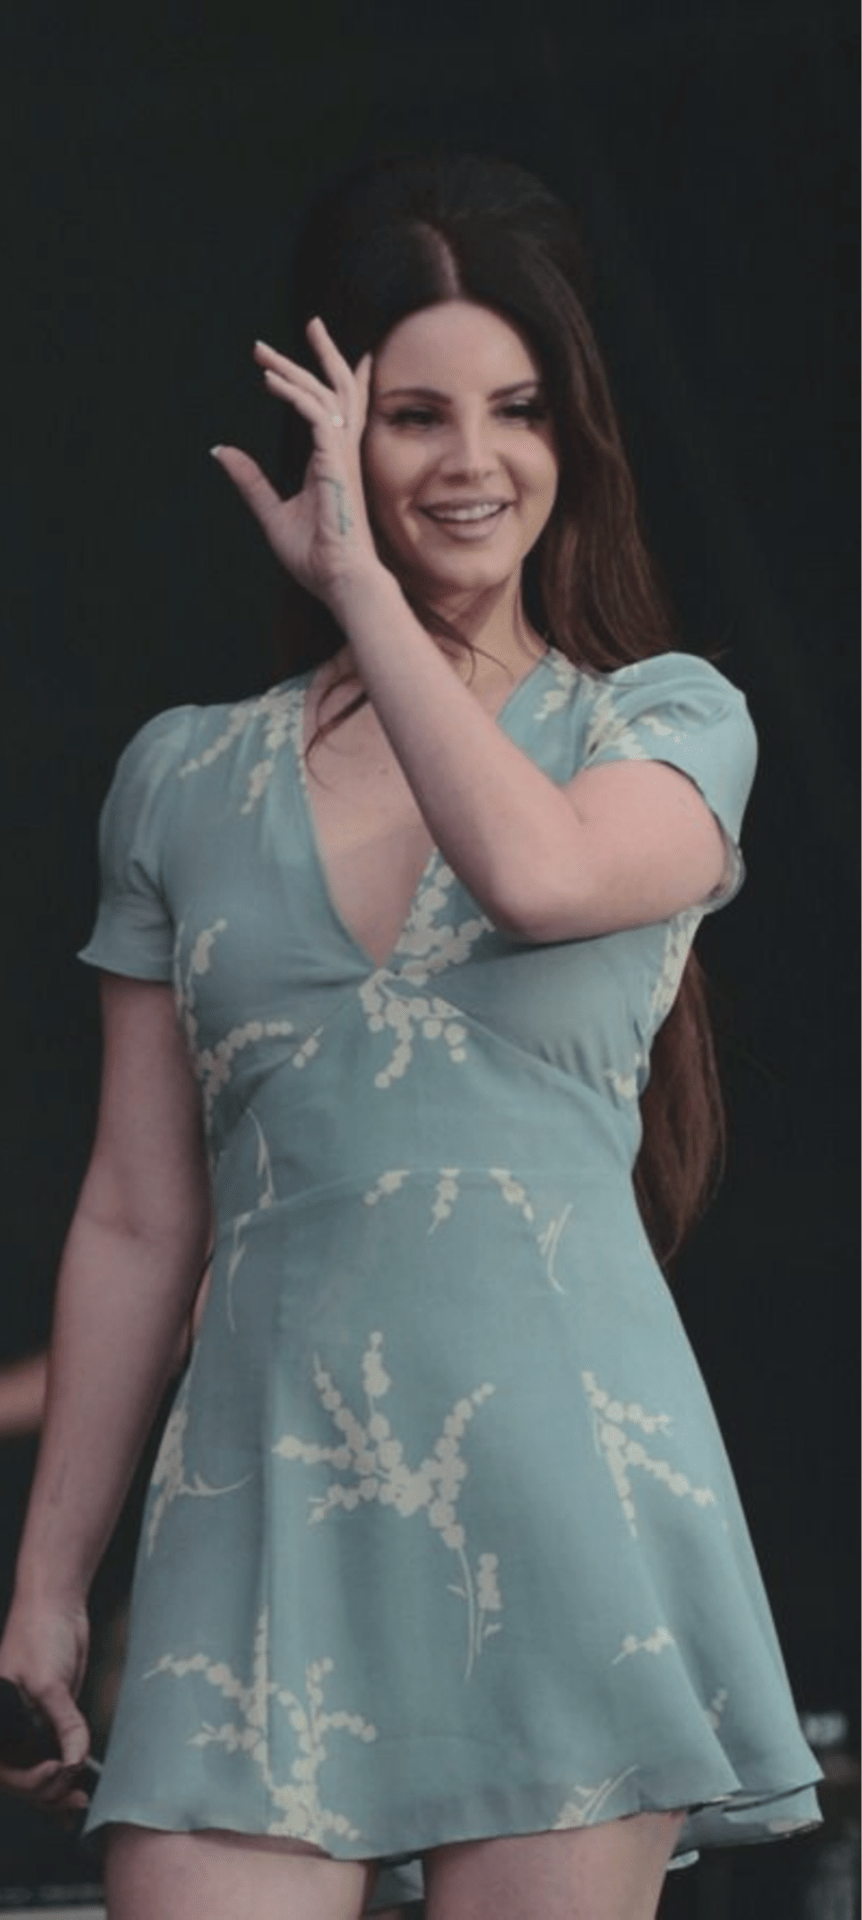 A woman in a blue dress waves to the crowd. - Lana Del Rey